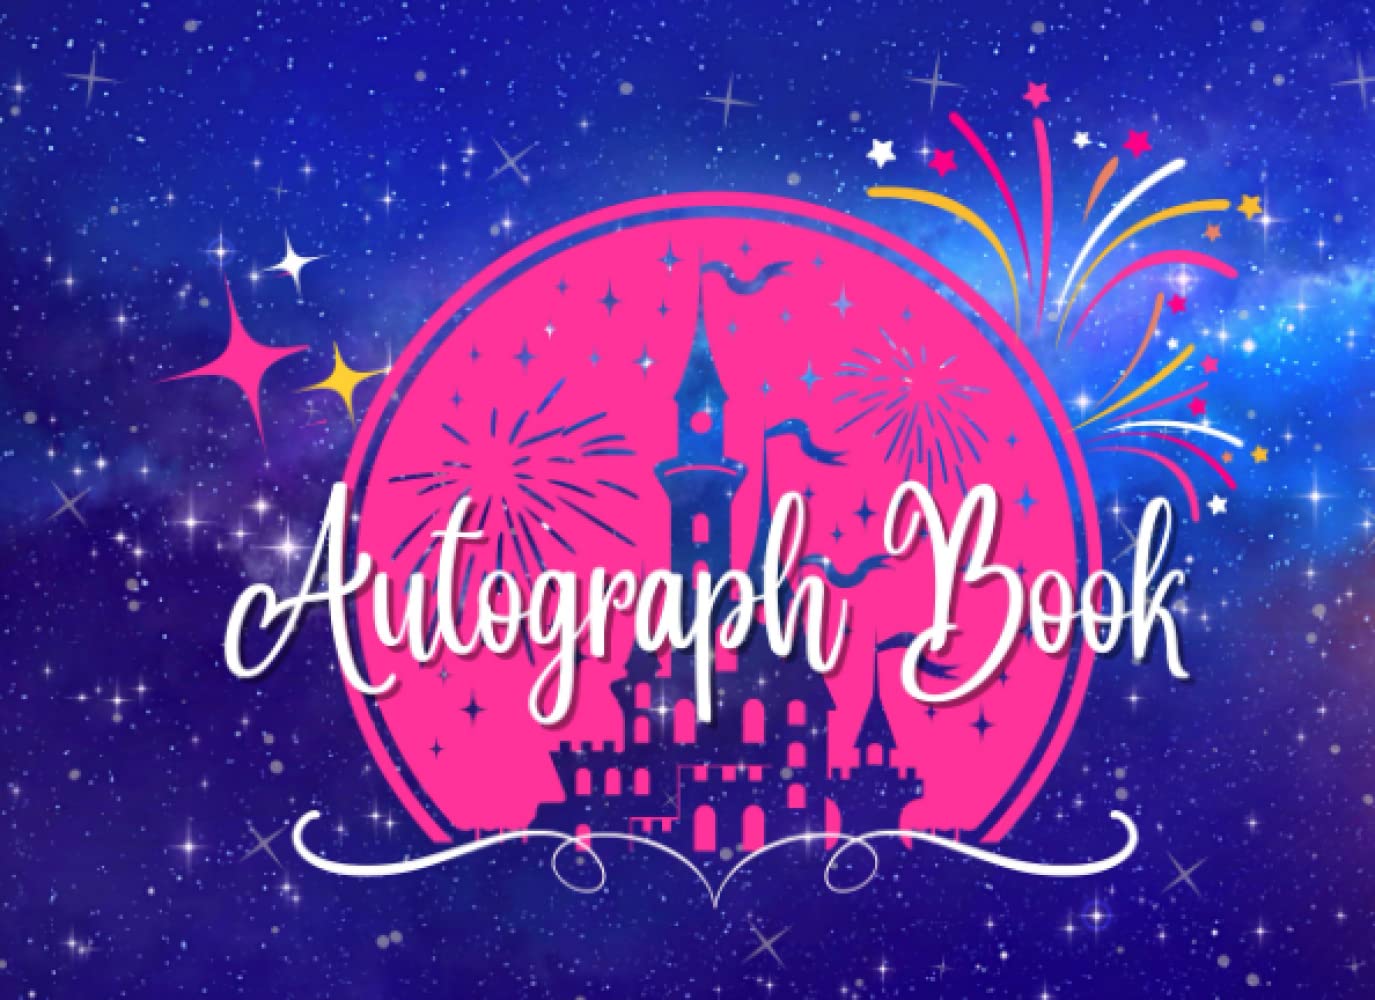 71urBGDECiL - Autograph Book: Signature & Photo Book, Blank Unlined Memory Album Photo, To Collect Signatures with Selfies or Pictures of Your favorite Characters ... of your Trips Memories or Family Vacations